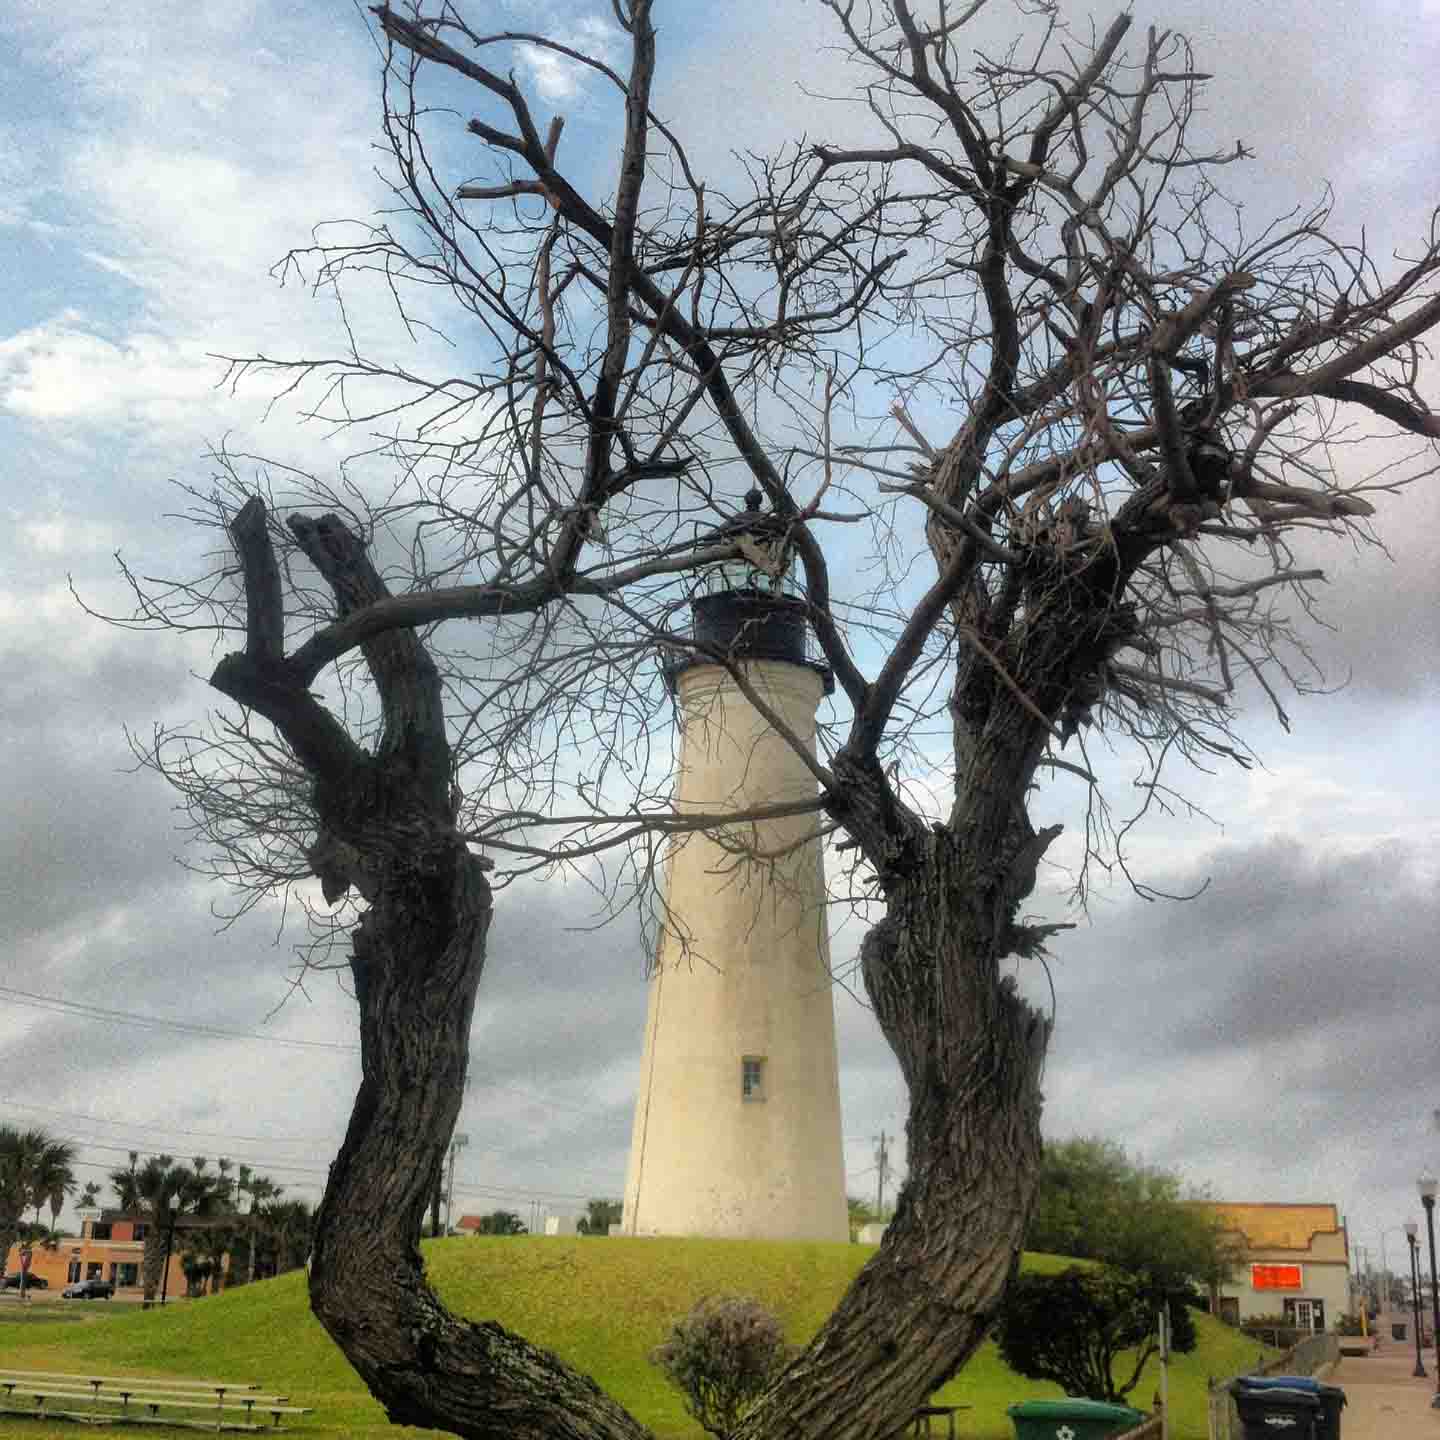 Getting to Know Port Isabel, Texas